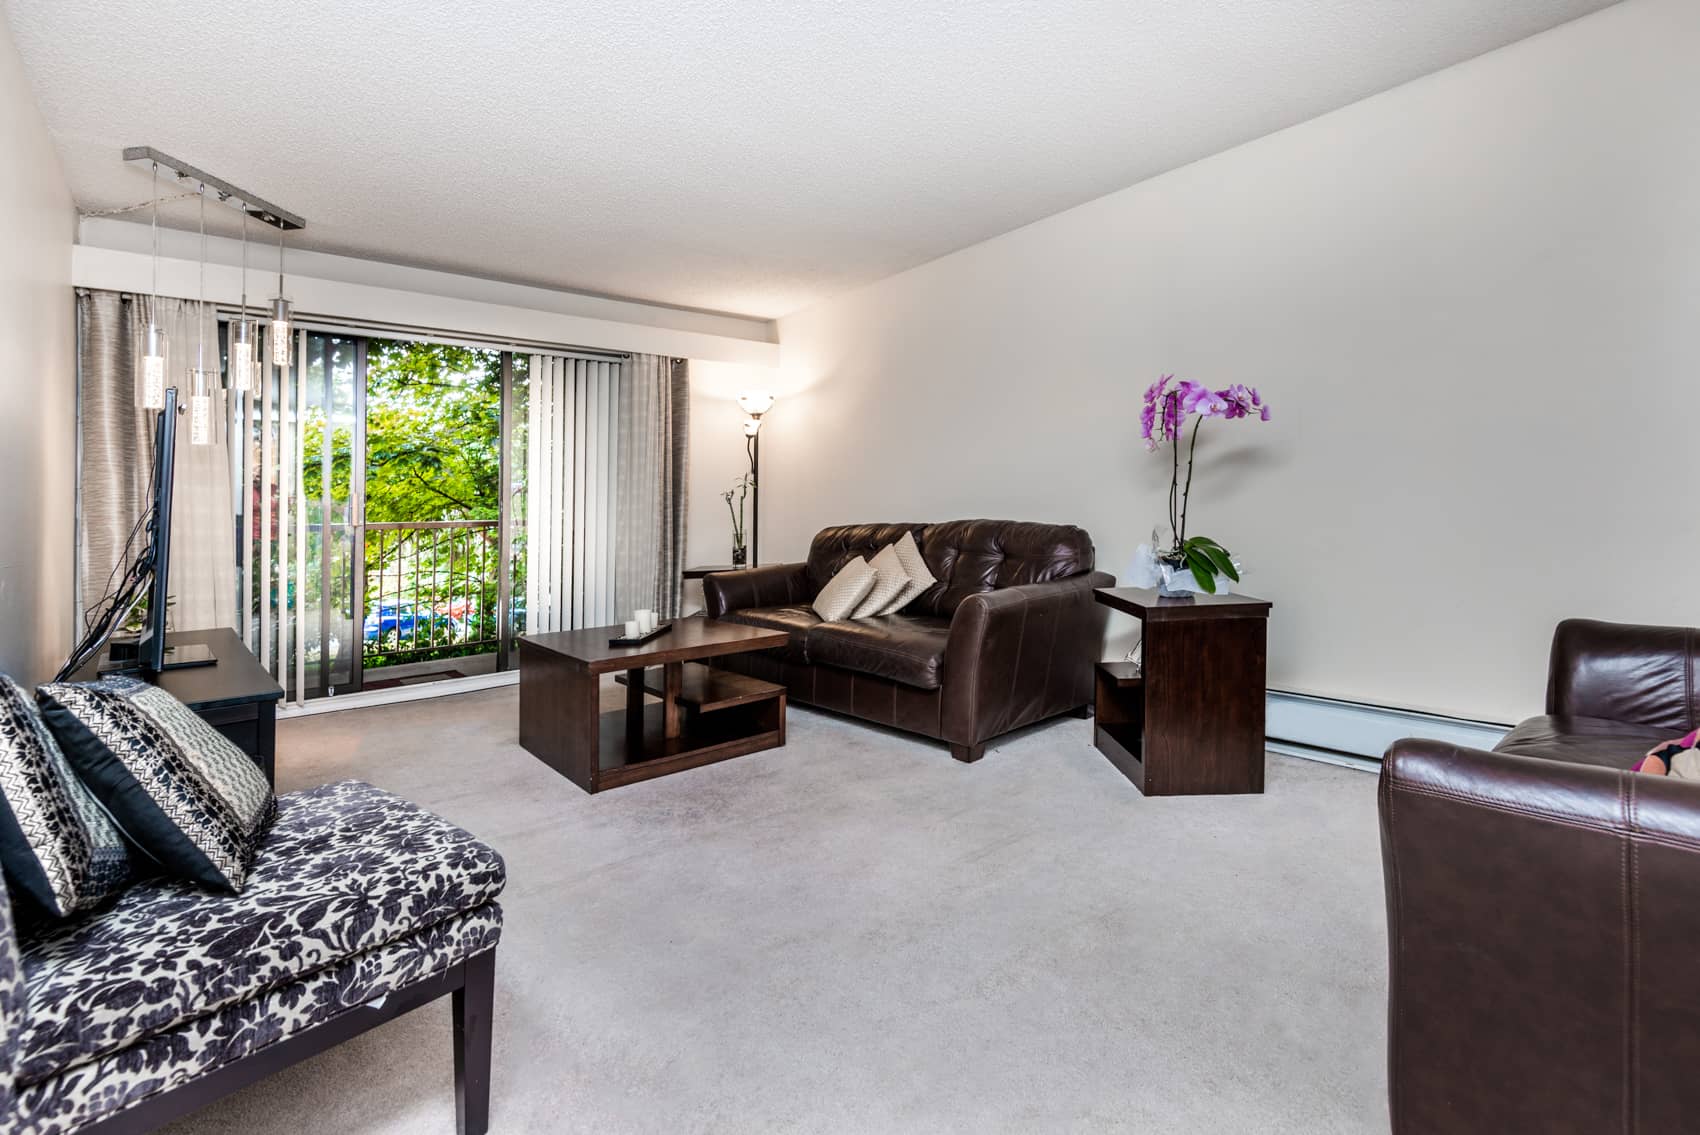 2 Bed Condo in Sapperton, New Westminster